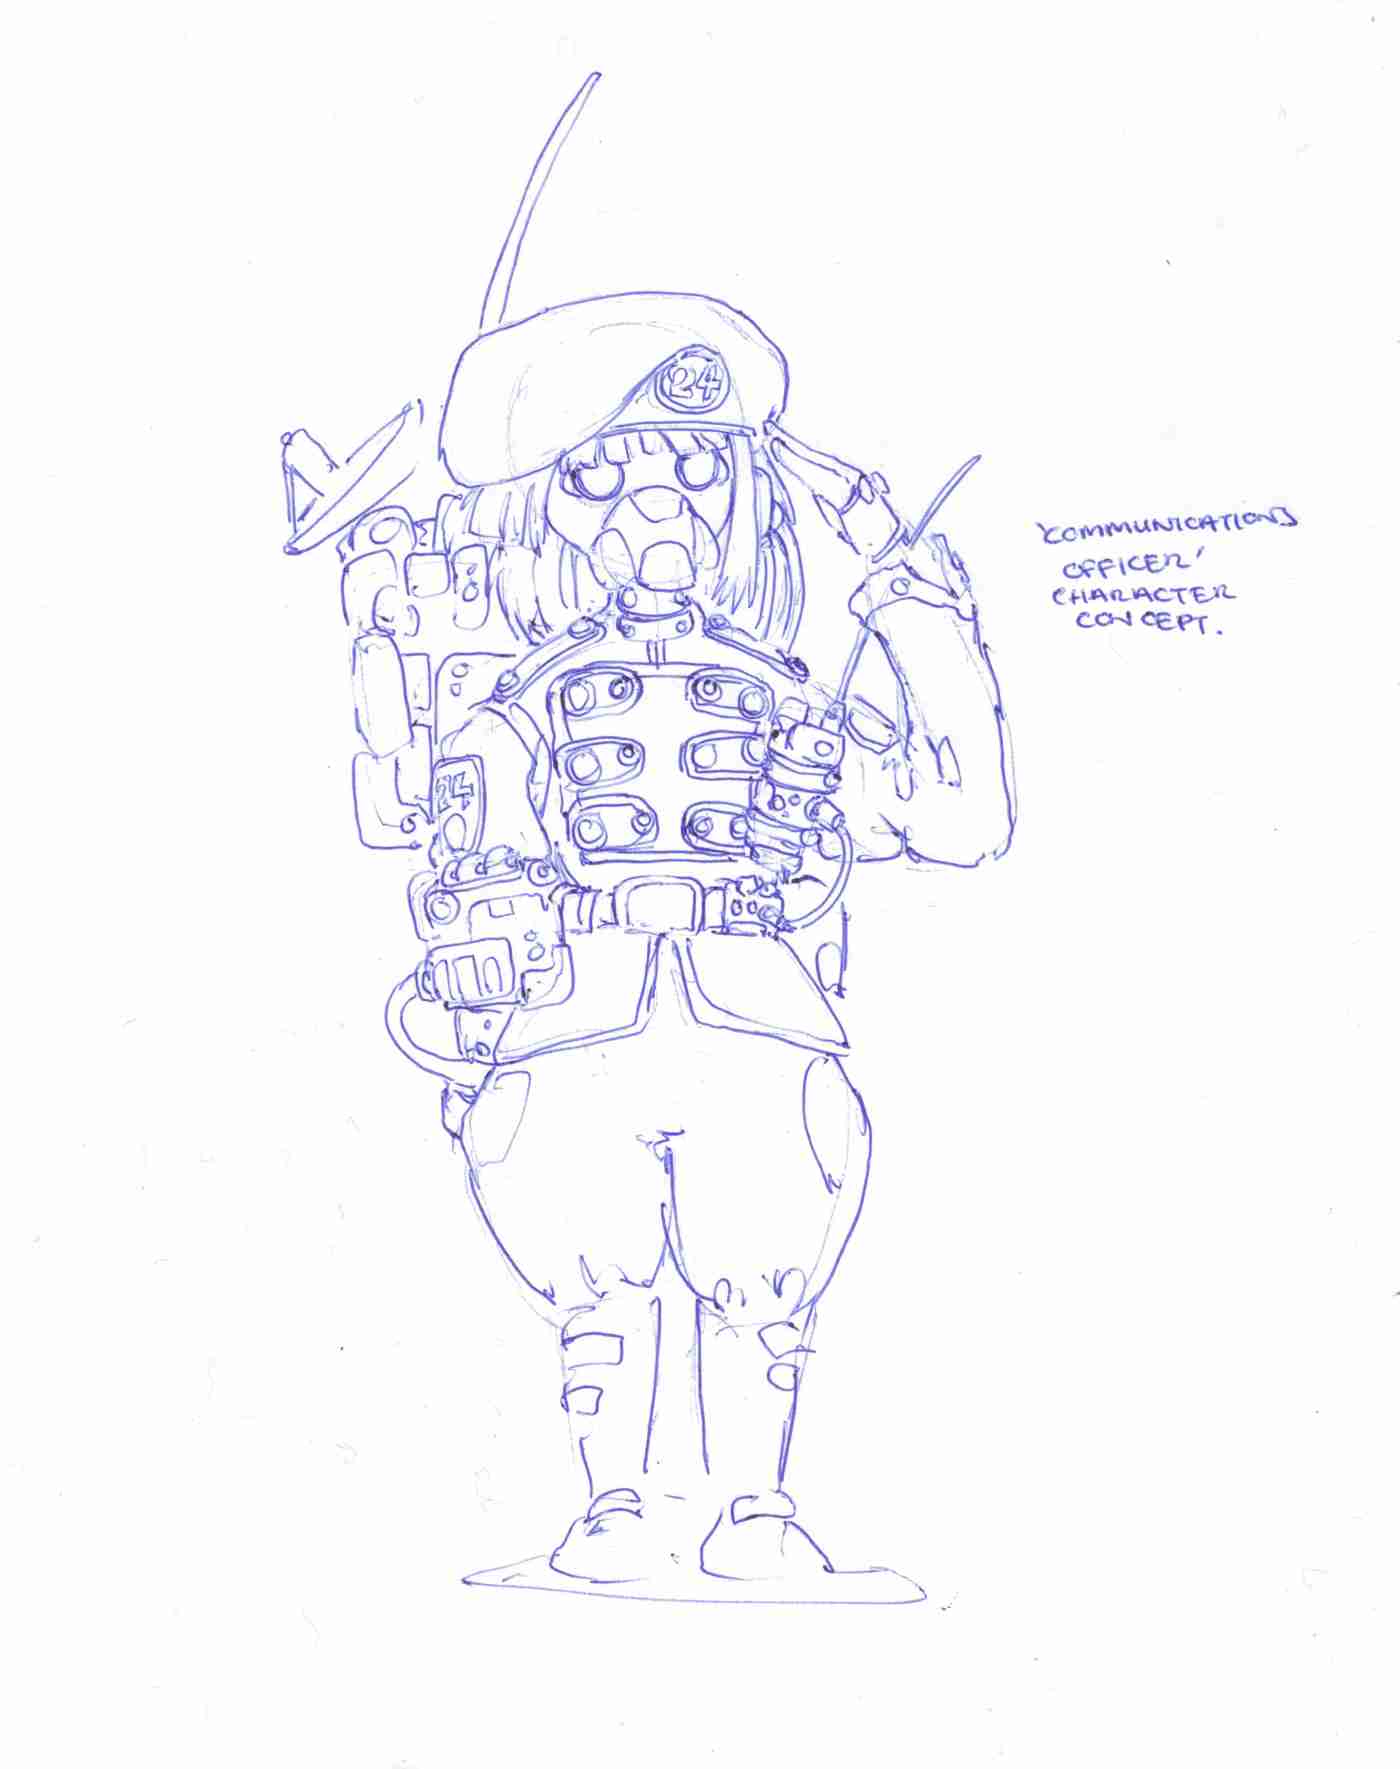 Character concept sketch, communications officer